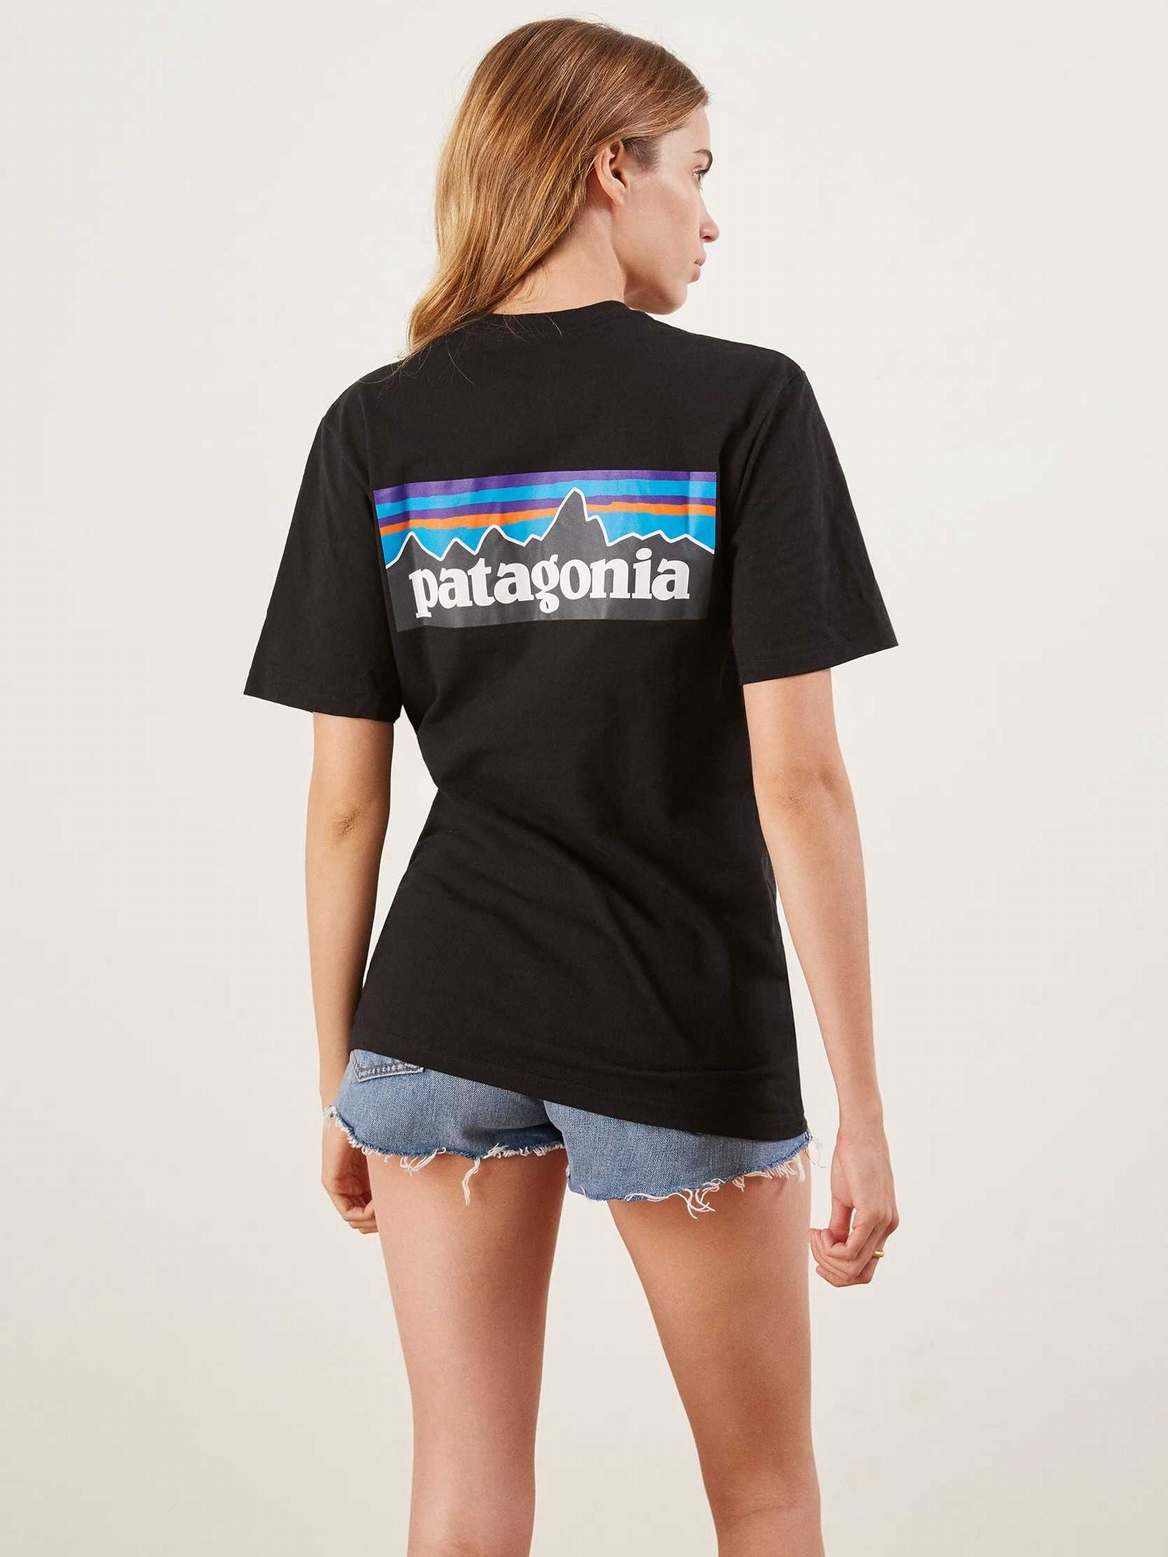 Reformation Patagonia Logo Women's T Shirts Black | OUTLET-8715460